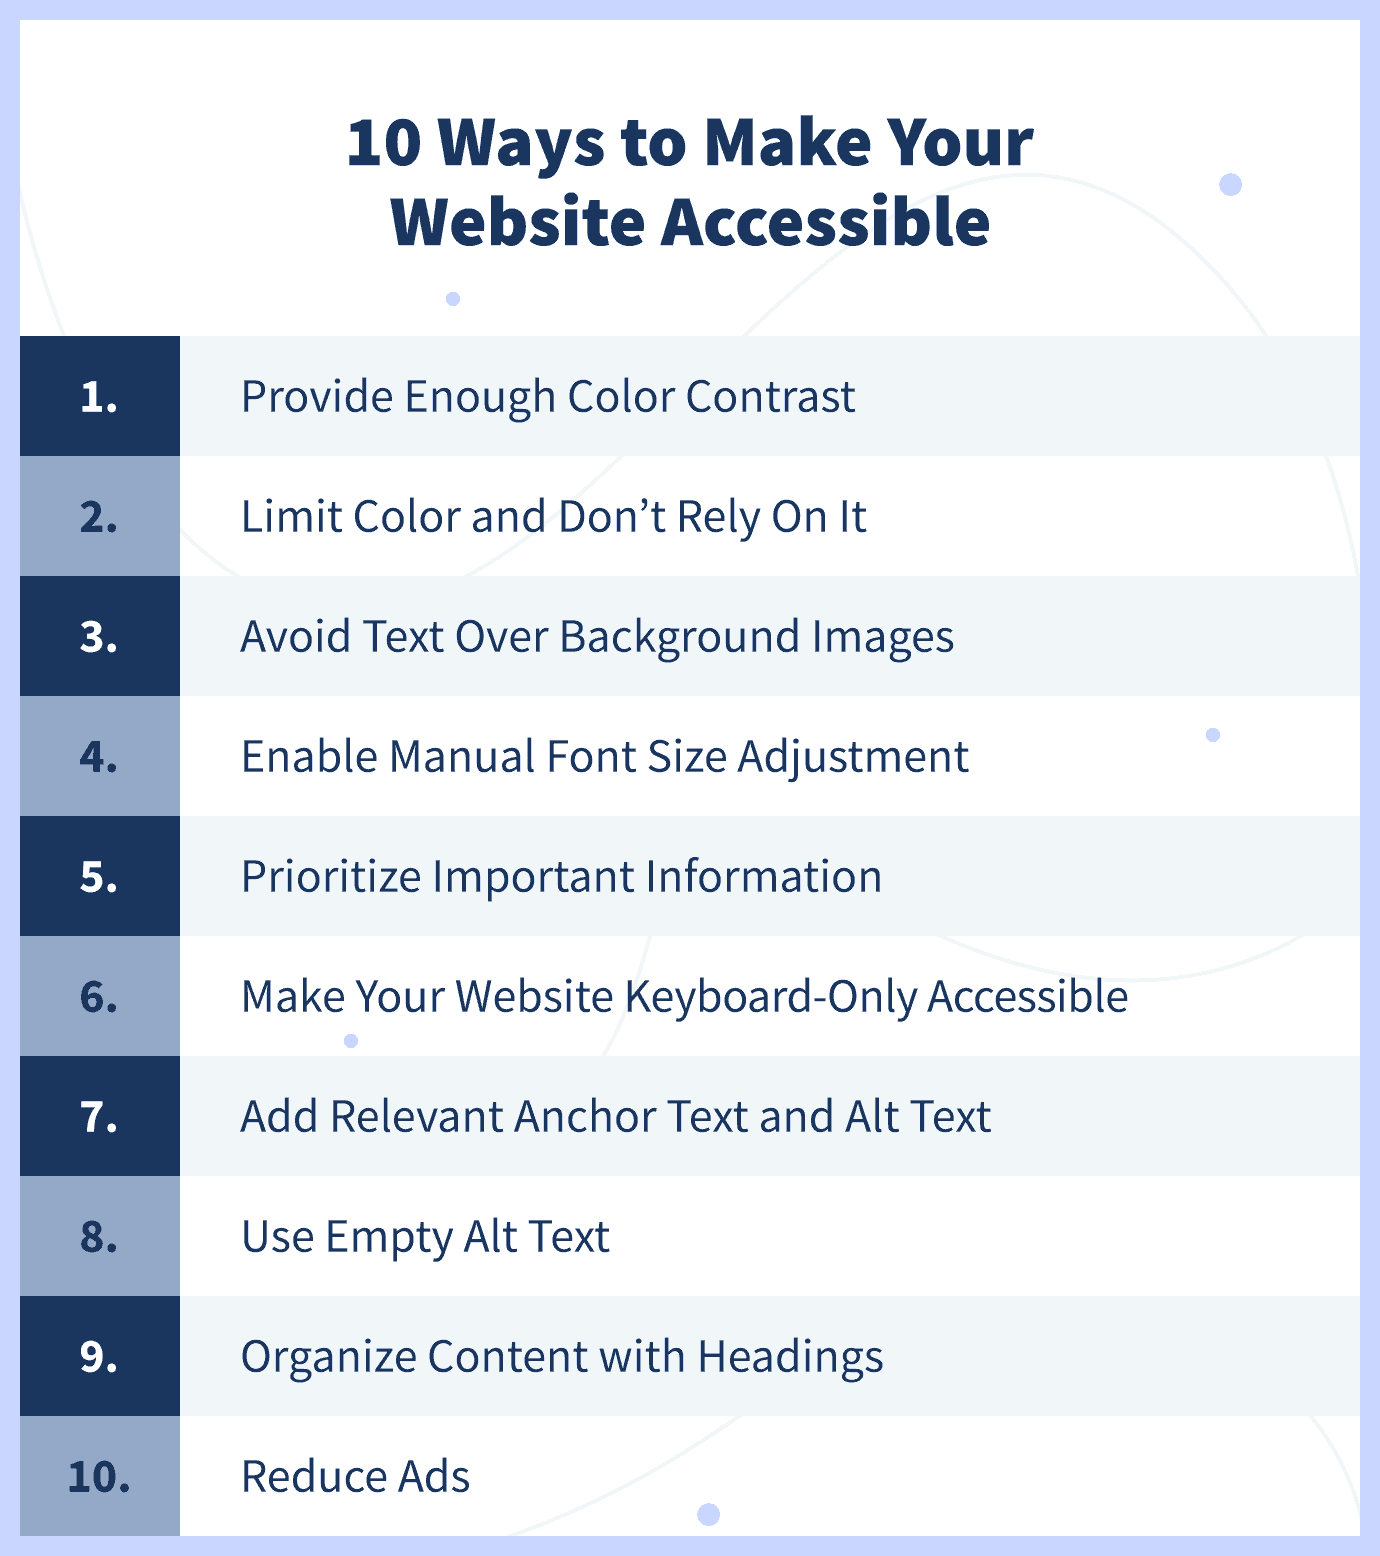 10 Ways to Make Your Website Accessible: Provide Enough Color Contrast, Avoid Text Over Background Images, Prioritize Important Information, Add Relevant Anchor Text and Alt Text, Organize Content with Headings, Limit Color and Don’t Rely On It, Enable Manual Font Size Adjustment, Make Your Website Keyboard-Only Accessible, Use Empty Alt Text, Reduce Ads